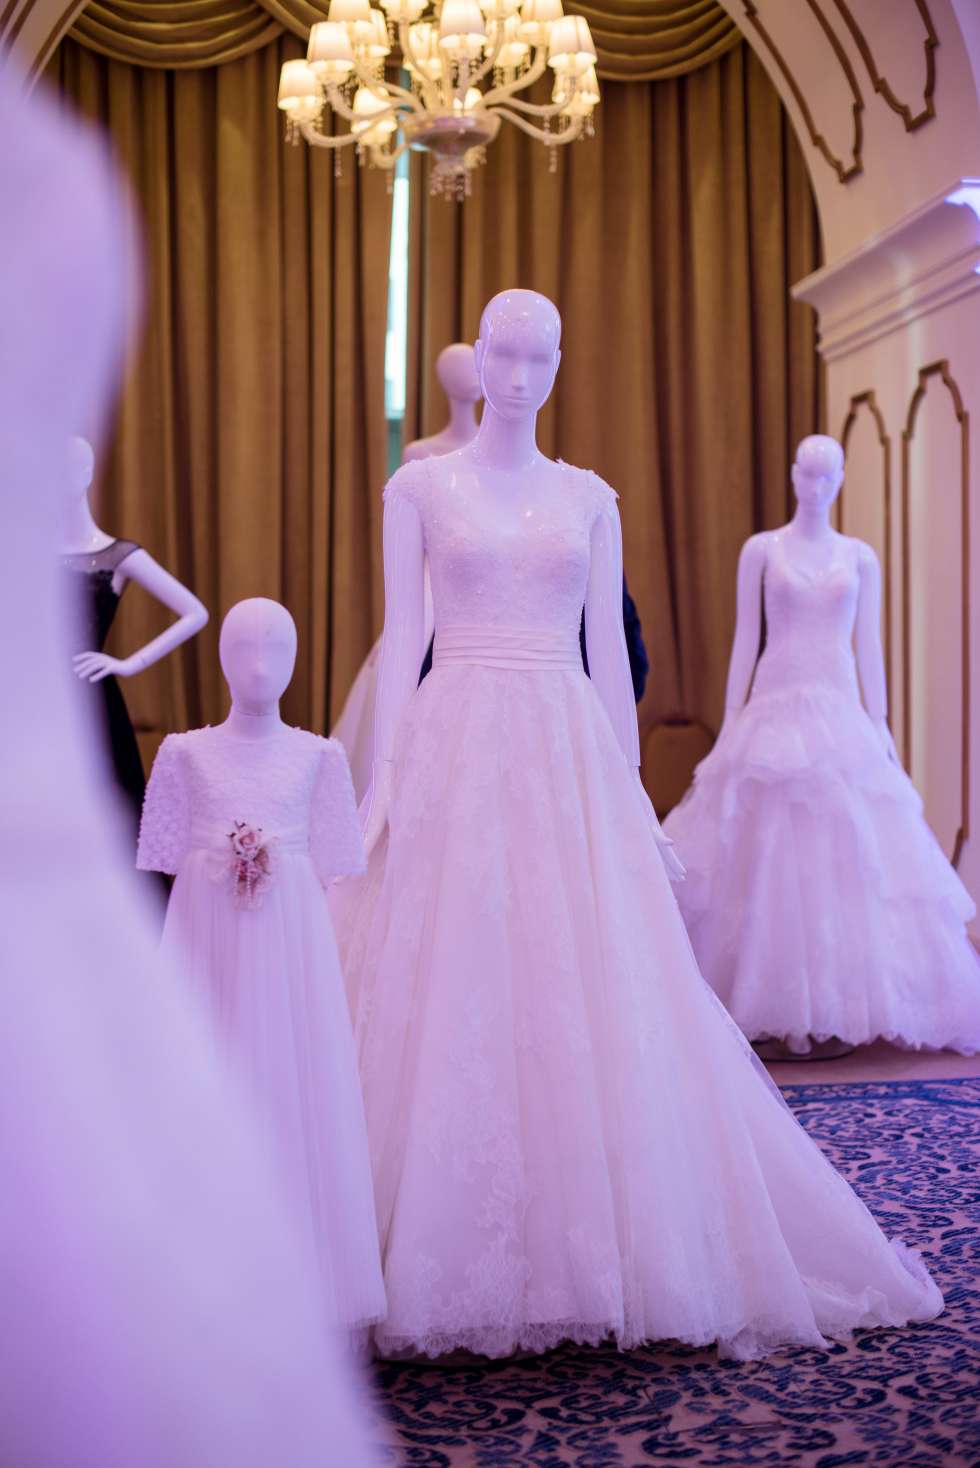 Dusit Doha Hotel Hosts its First Bridal Expo